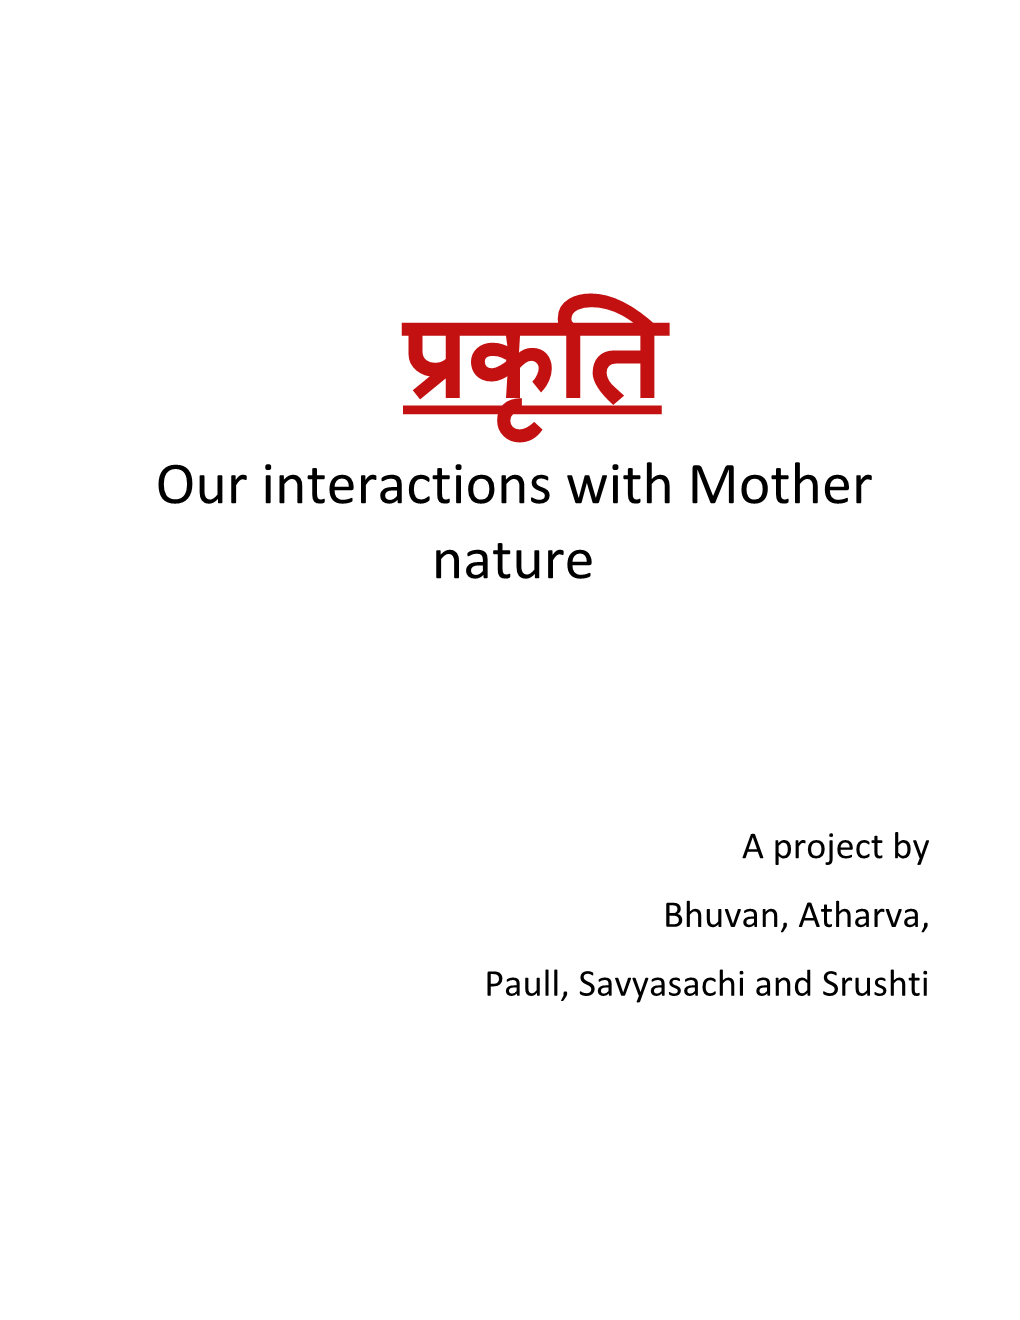 Prakruthi Our Interaction with Mother Nature.Pdf